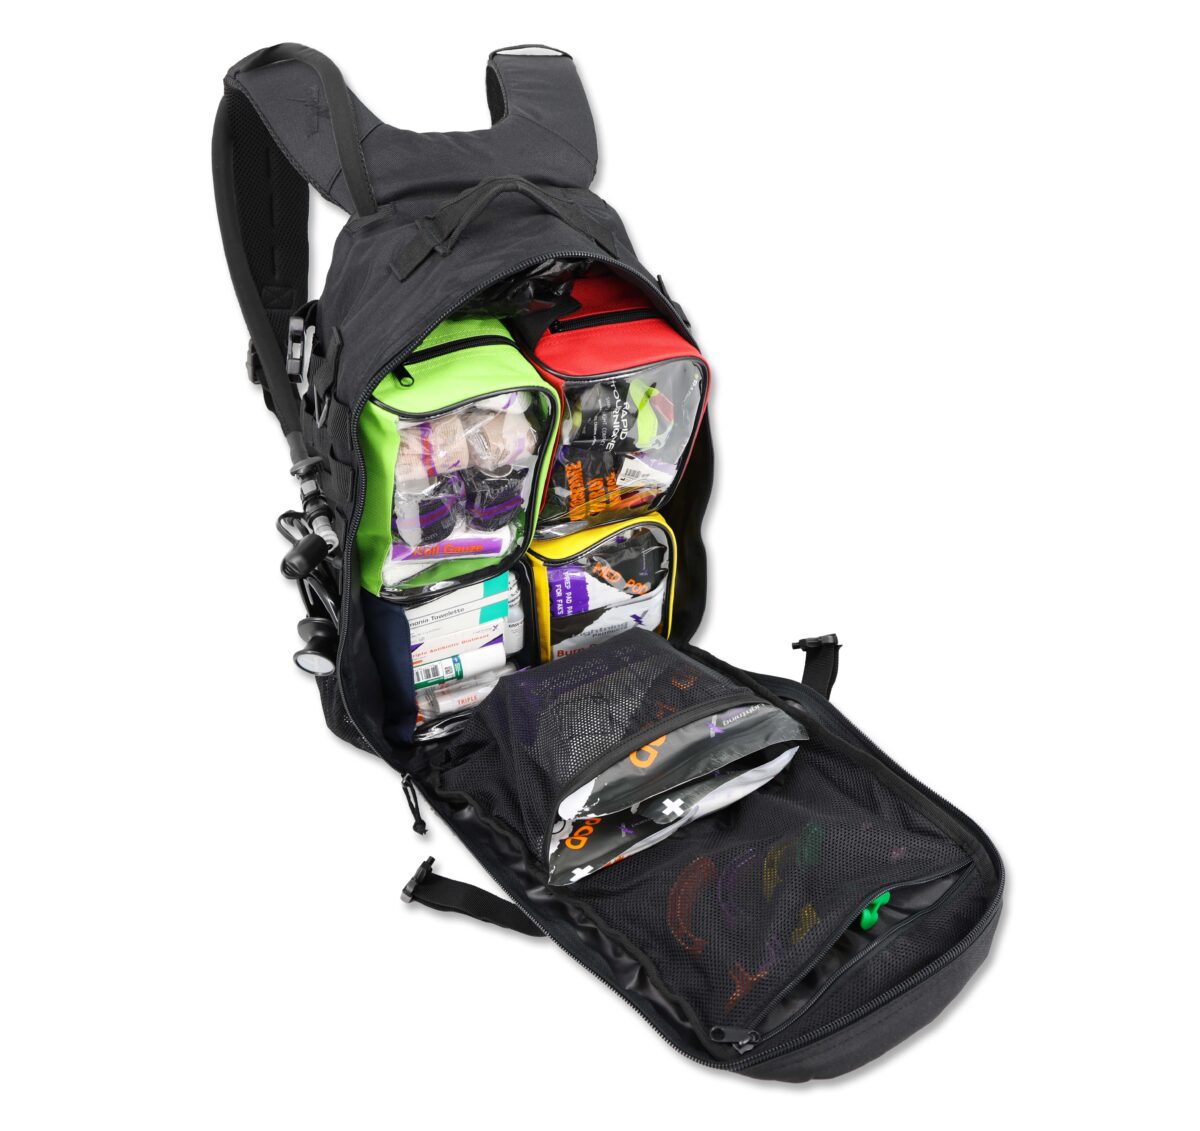 Lightning X premium tacmed molle trauma backpack kit fully stocked gear bag for ems emt first responder w/ first aid supplies including quikclot, tourniquet, israeli bandage, nasal airways and professional medical supplies with removable colored organizer pouches and hydration bladder - BLACK